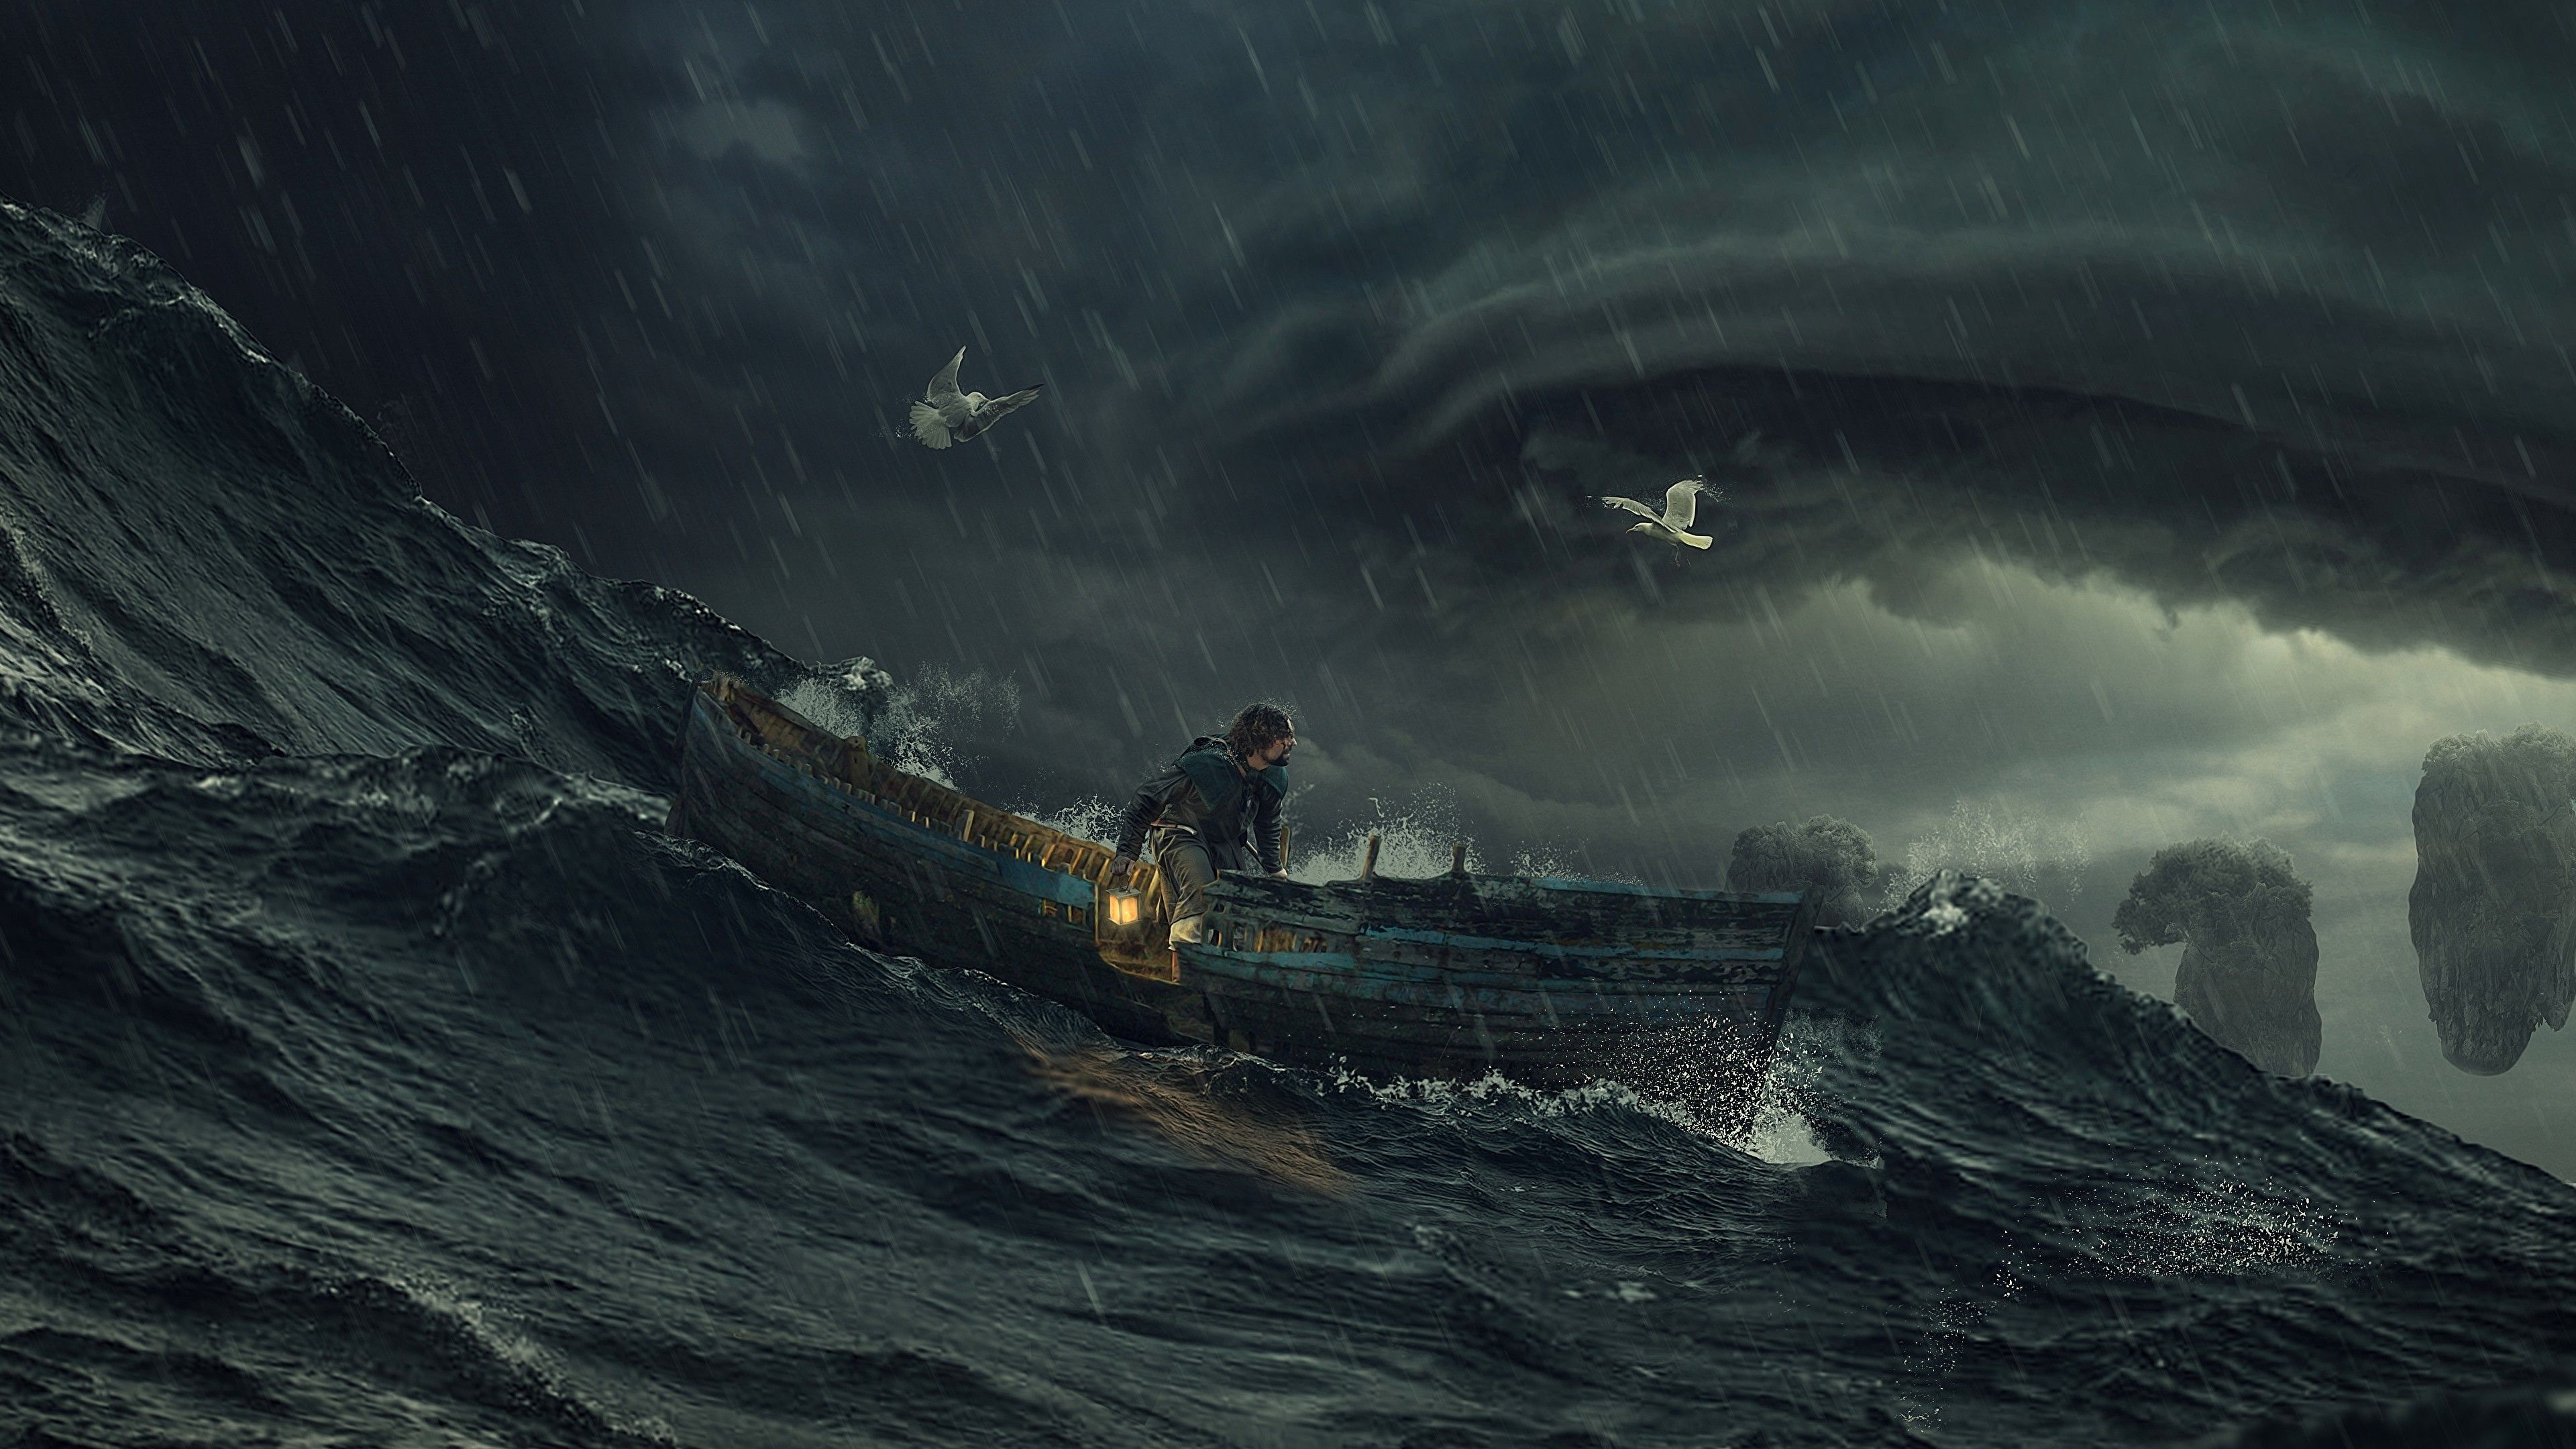 A man in a boat in the middle of a storm - Storm